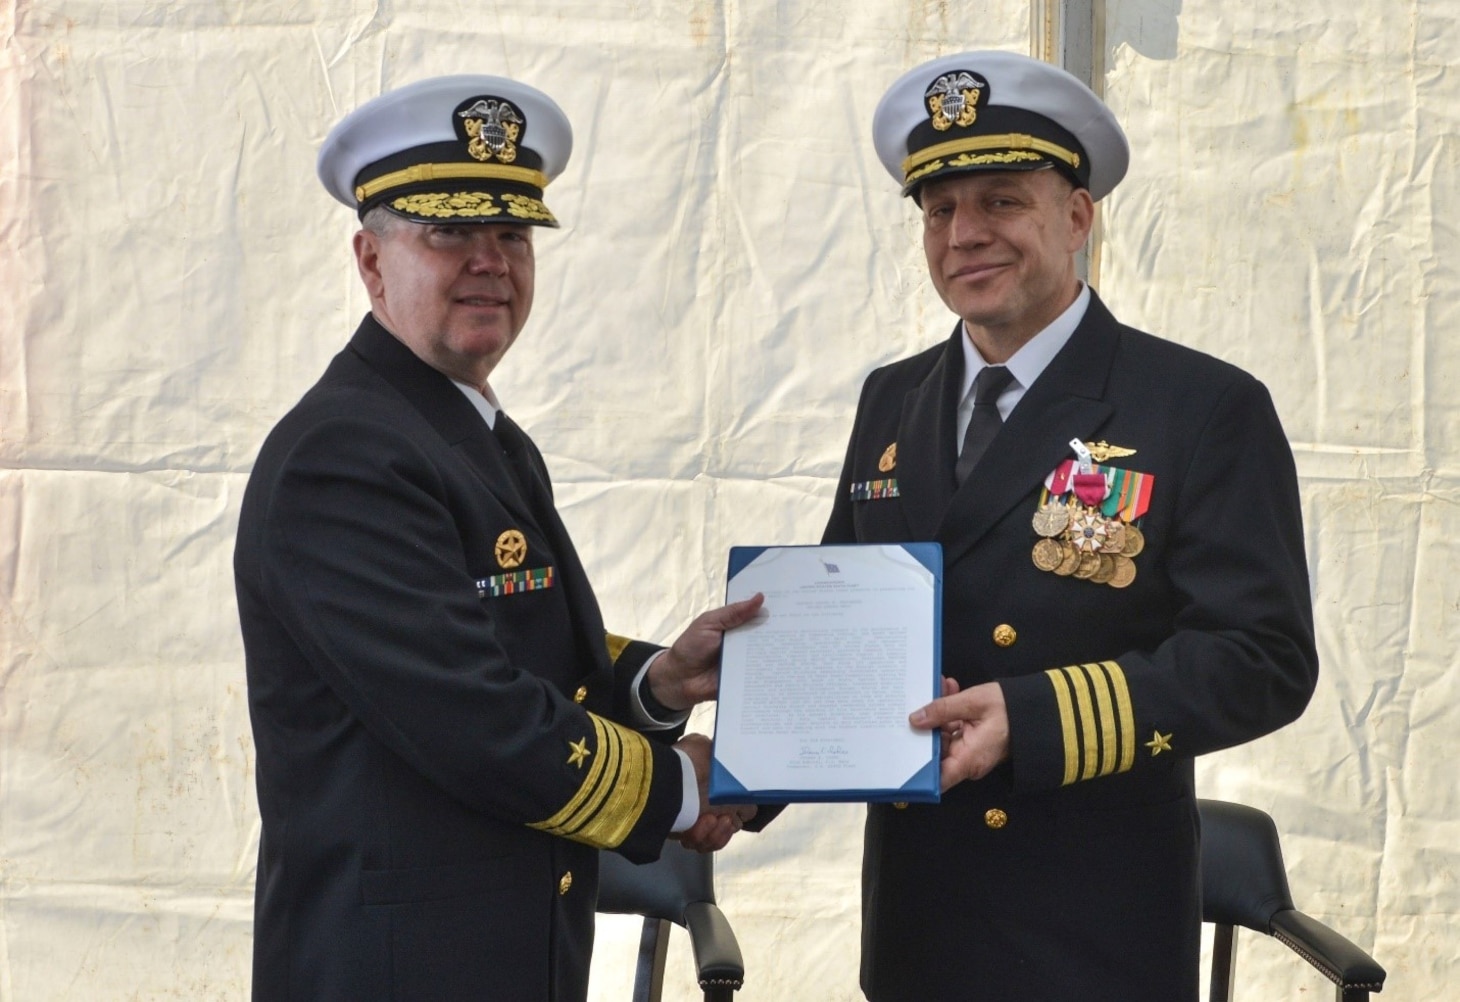 (April 11, 2023) Vice Adm. Thomas Ishee, commander, U.S. Sixth Fleet, presents Capt. Daniel Prochazka, commanding officer of the Blue Ridge-class command and control ship USS Mount Whitney (LCC 20), with an award during the ship’s change of command in Gaeta, Italy, April 11, 2023. Mount Whitney, the U.S. Sixth Fleet flagship, homeported in Gaeta, Italy entered its regularly scheduled overhaul to make improvements in order to increase the security and stability of the U.S. Sixth Fleet area of operations.